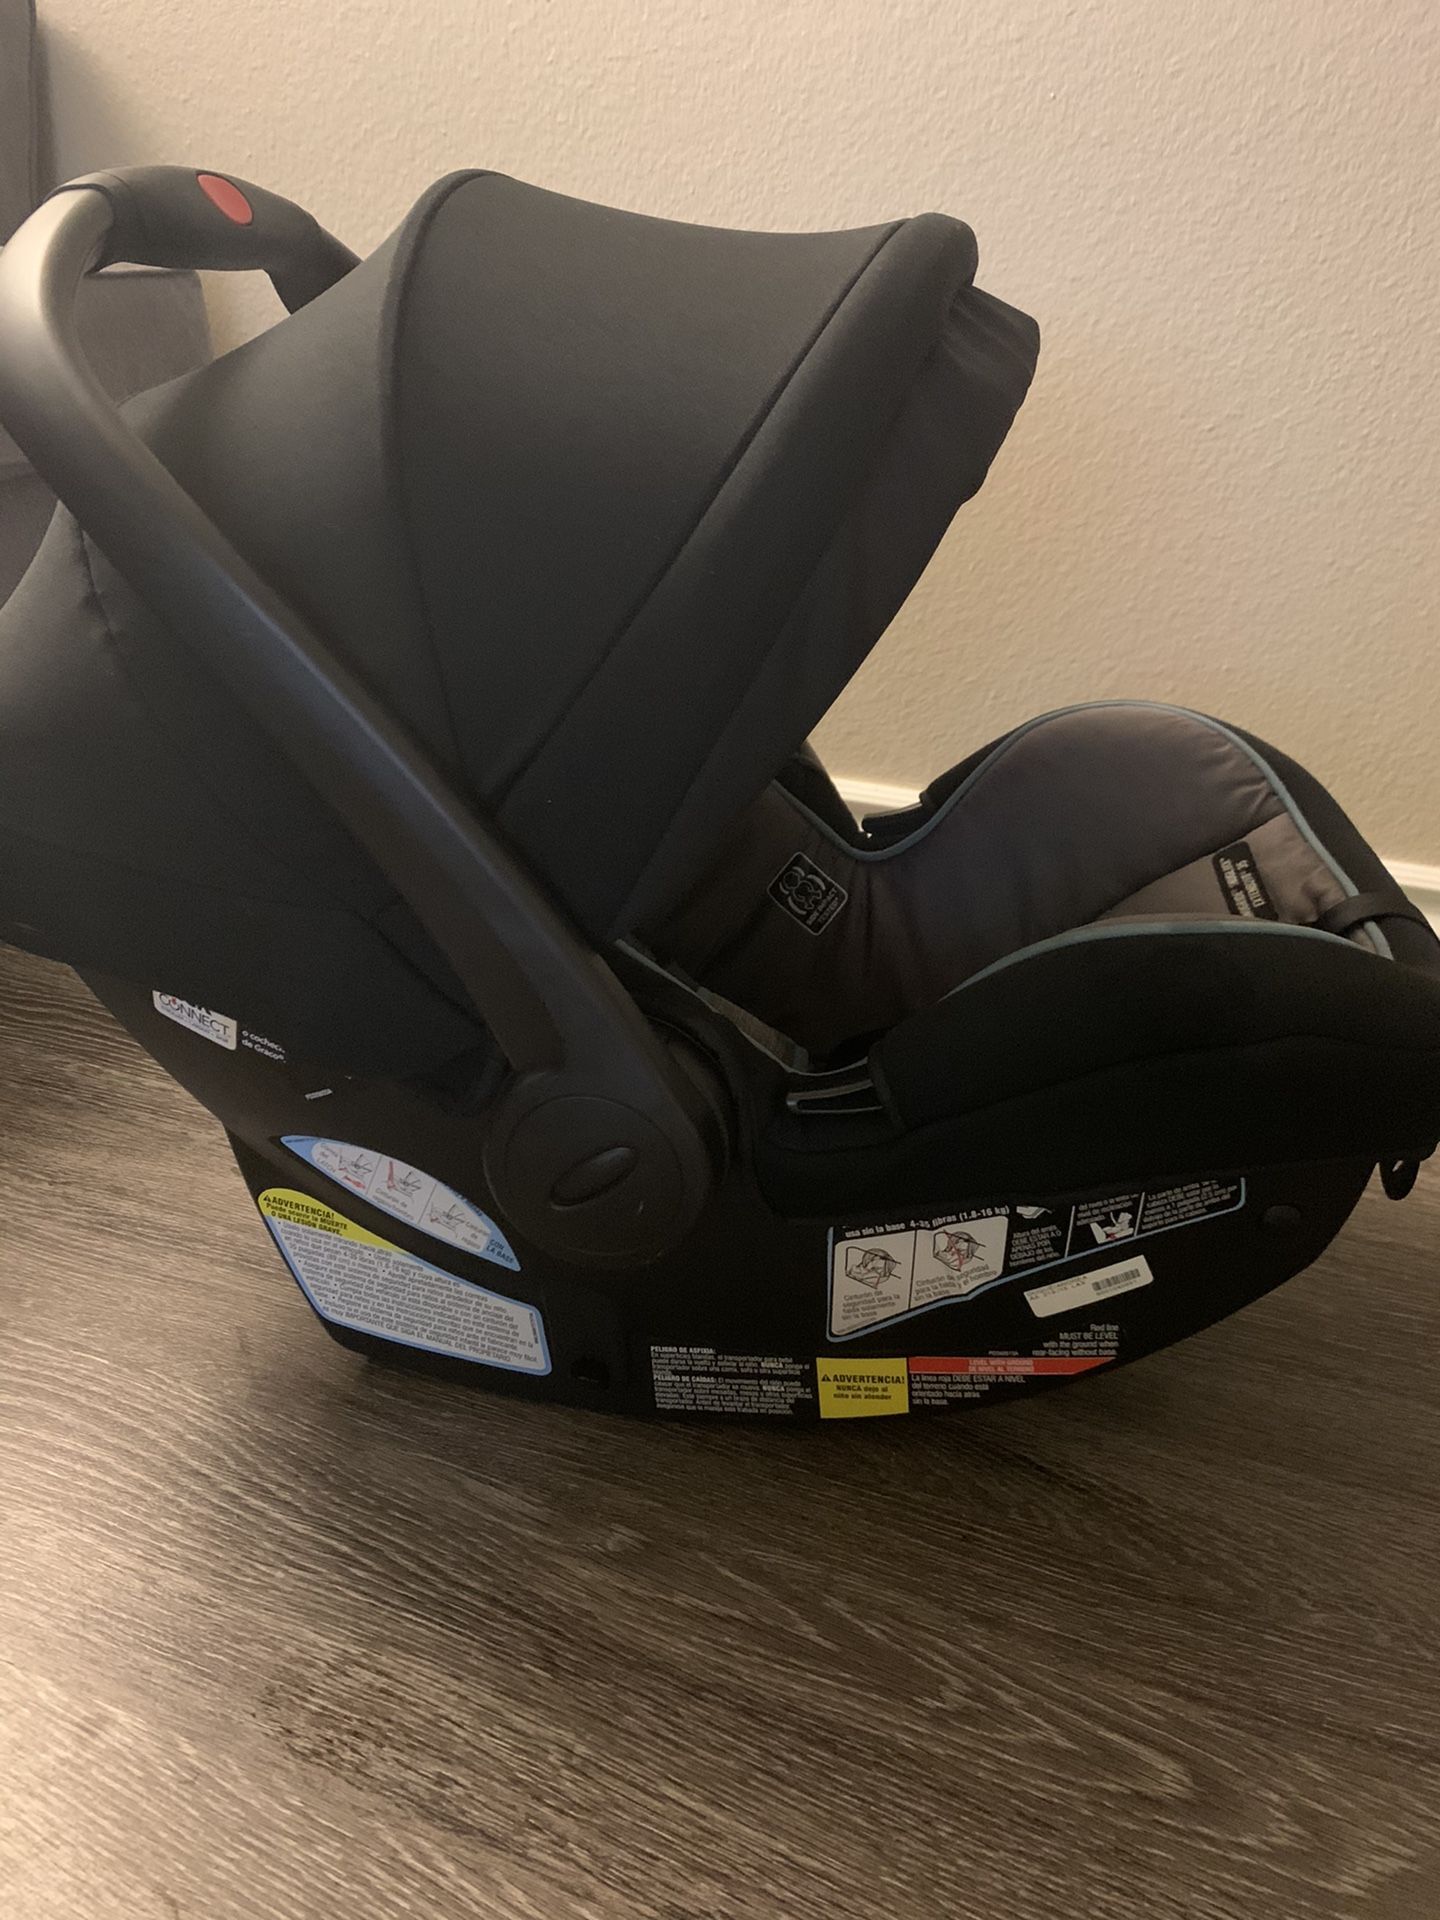 Graco infant car seat for sale . Base included